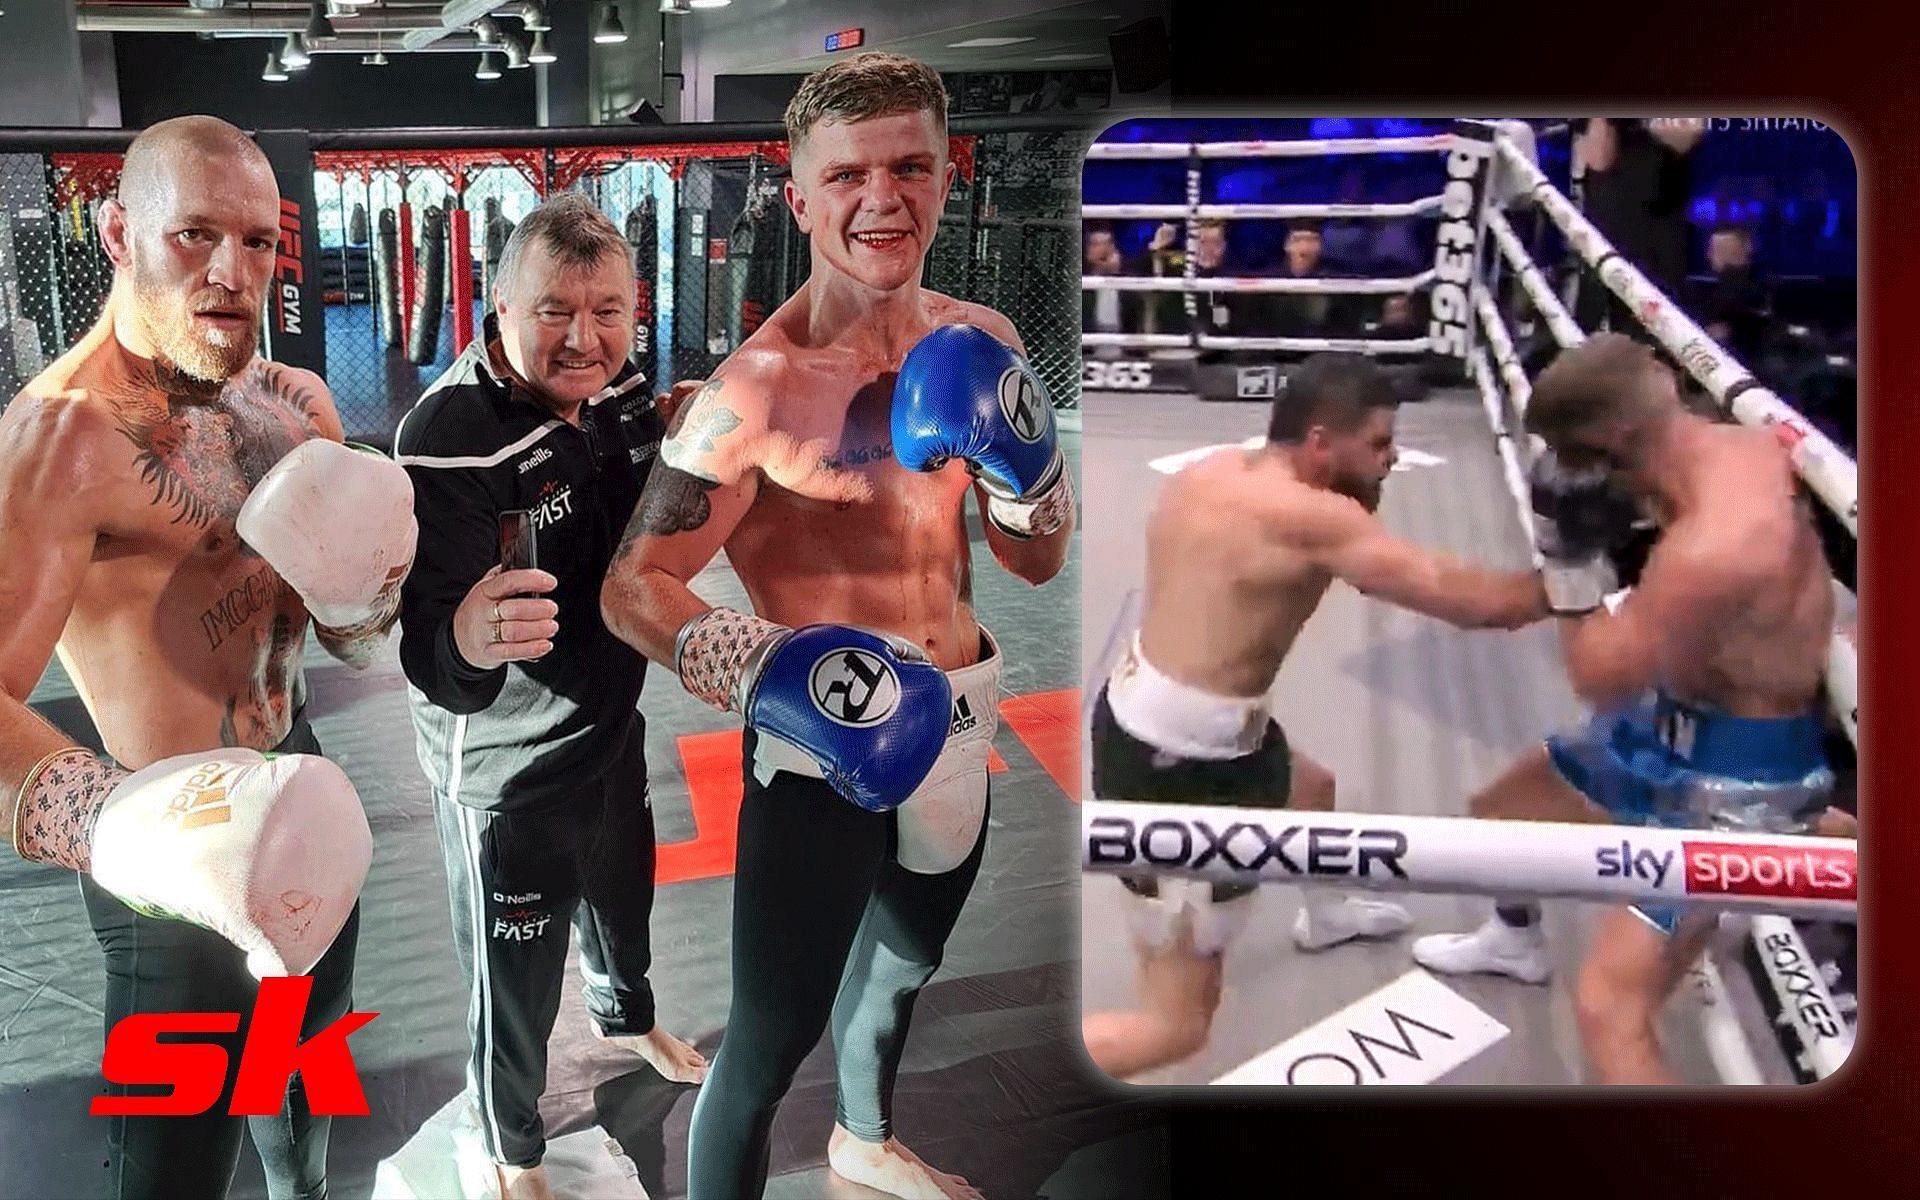 Conor McGregor with Dylan Moran (Left), Dylan Moran vs. Florian Marku (Right) [Image courtesy: @dylanmorann on Instagram, @BOXRAW on Twitter]